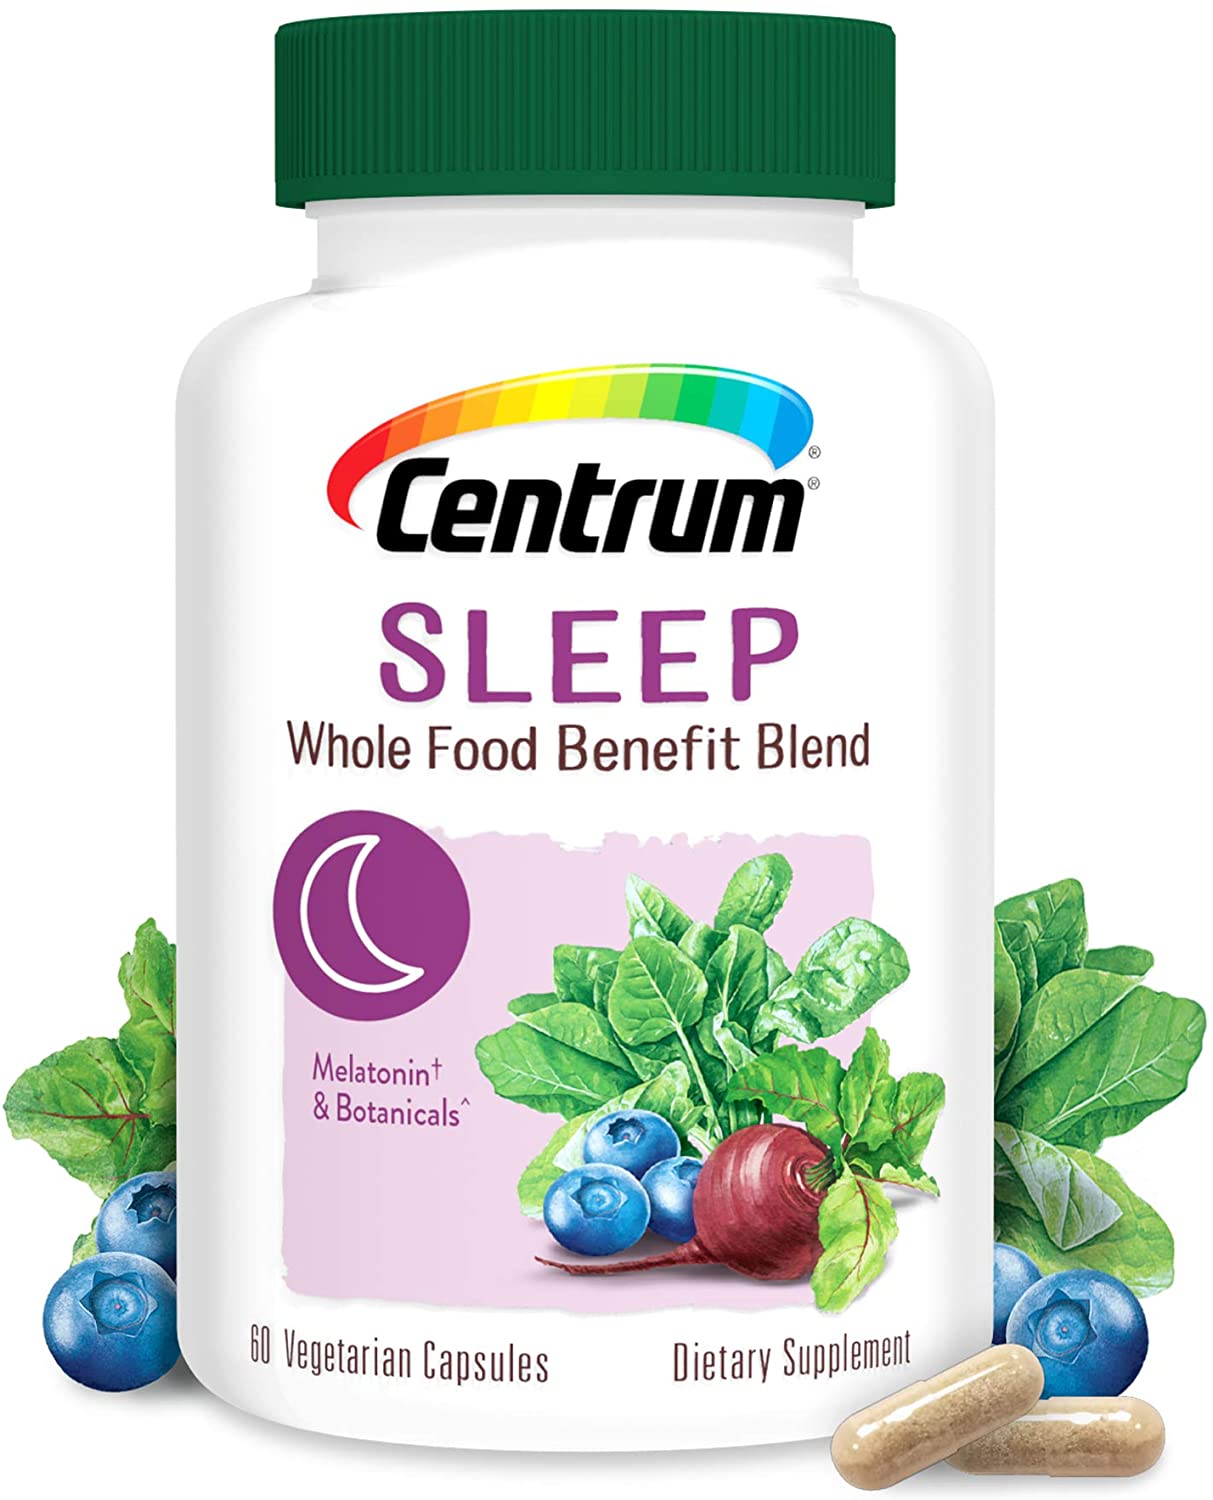 60-Ct Centrum Sleep Whole Food Benefit Blend w/ Melatonin & Botanicals Supplement $4.70 w/ S&S + Free Shipping w/ Prime or Orders $25+